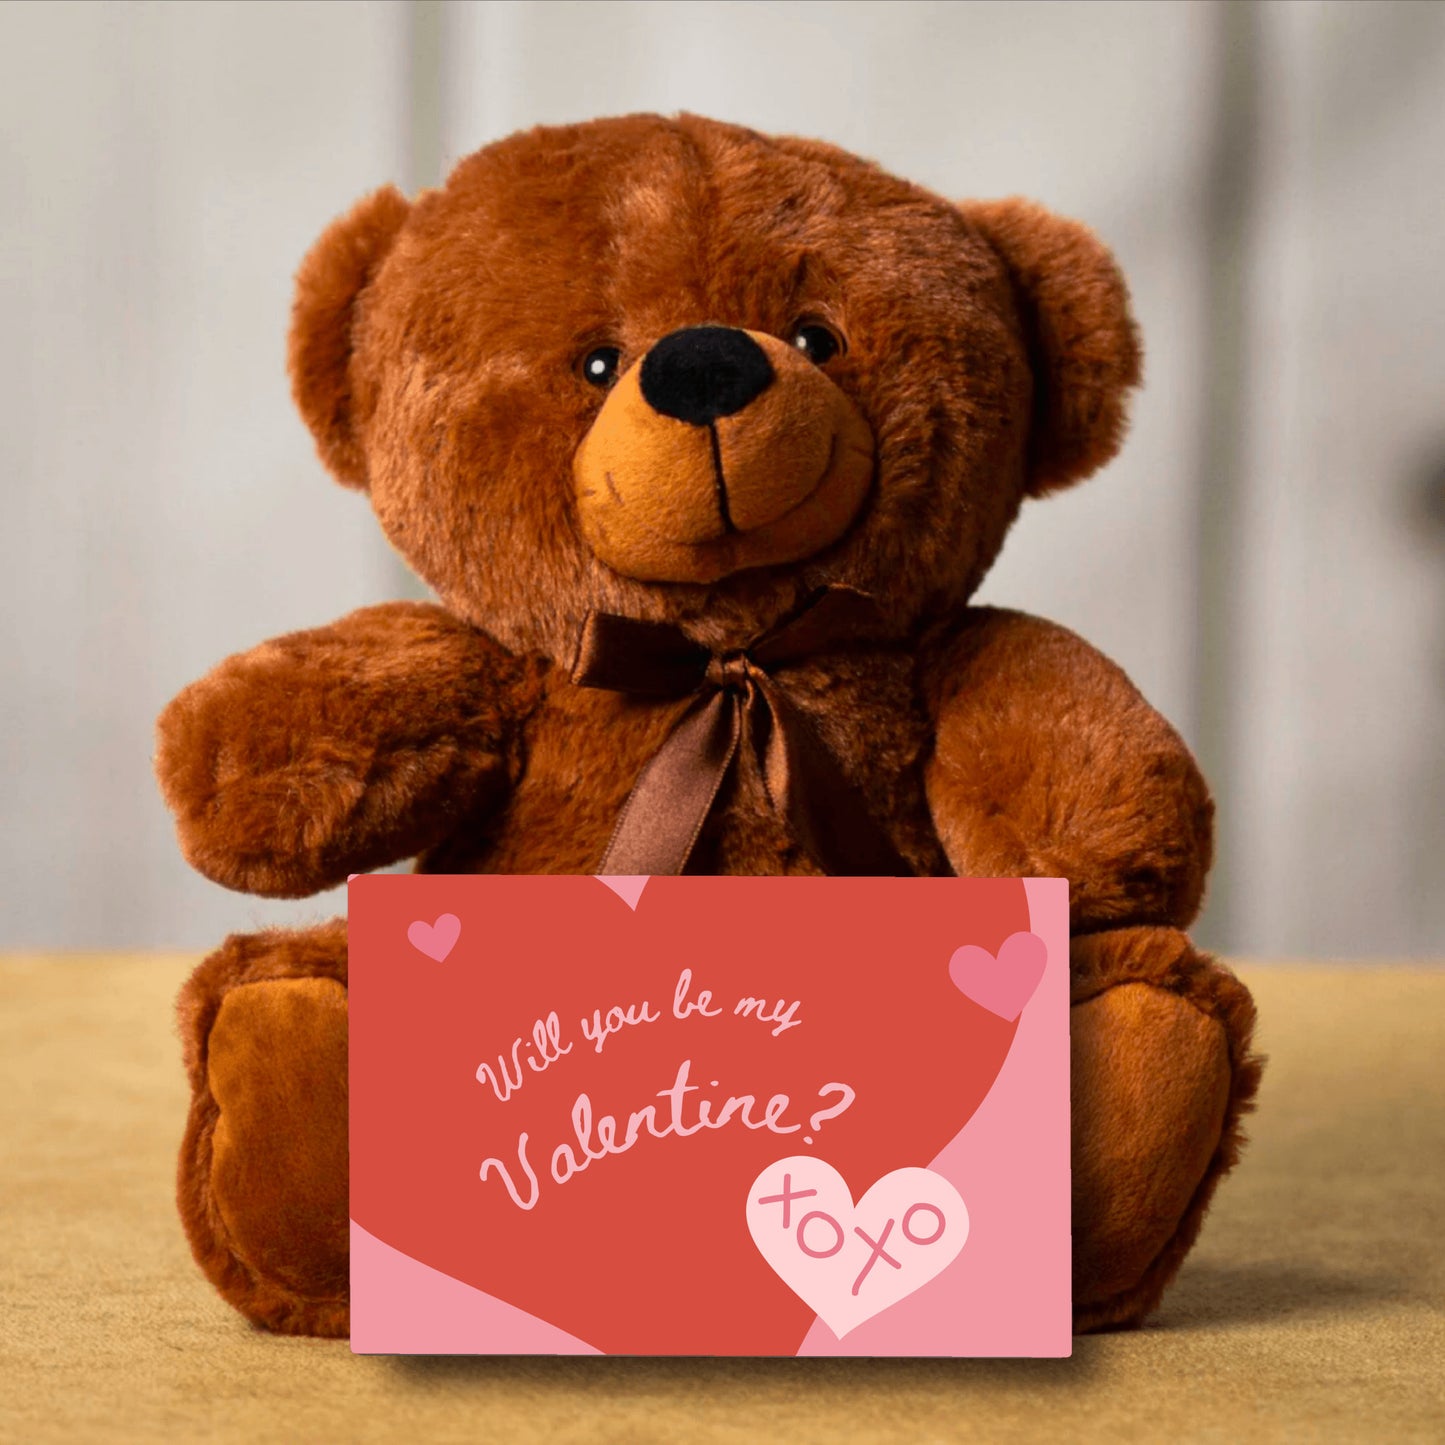 Will you be my Valentine Teddy Bear FREE SHIPPING